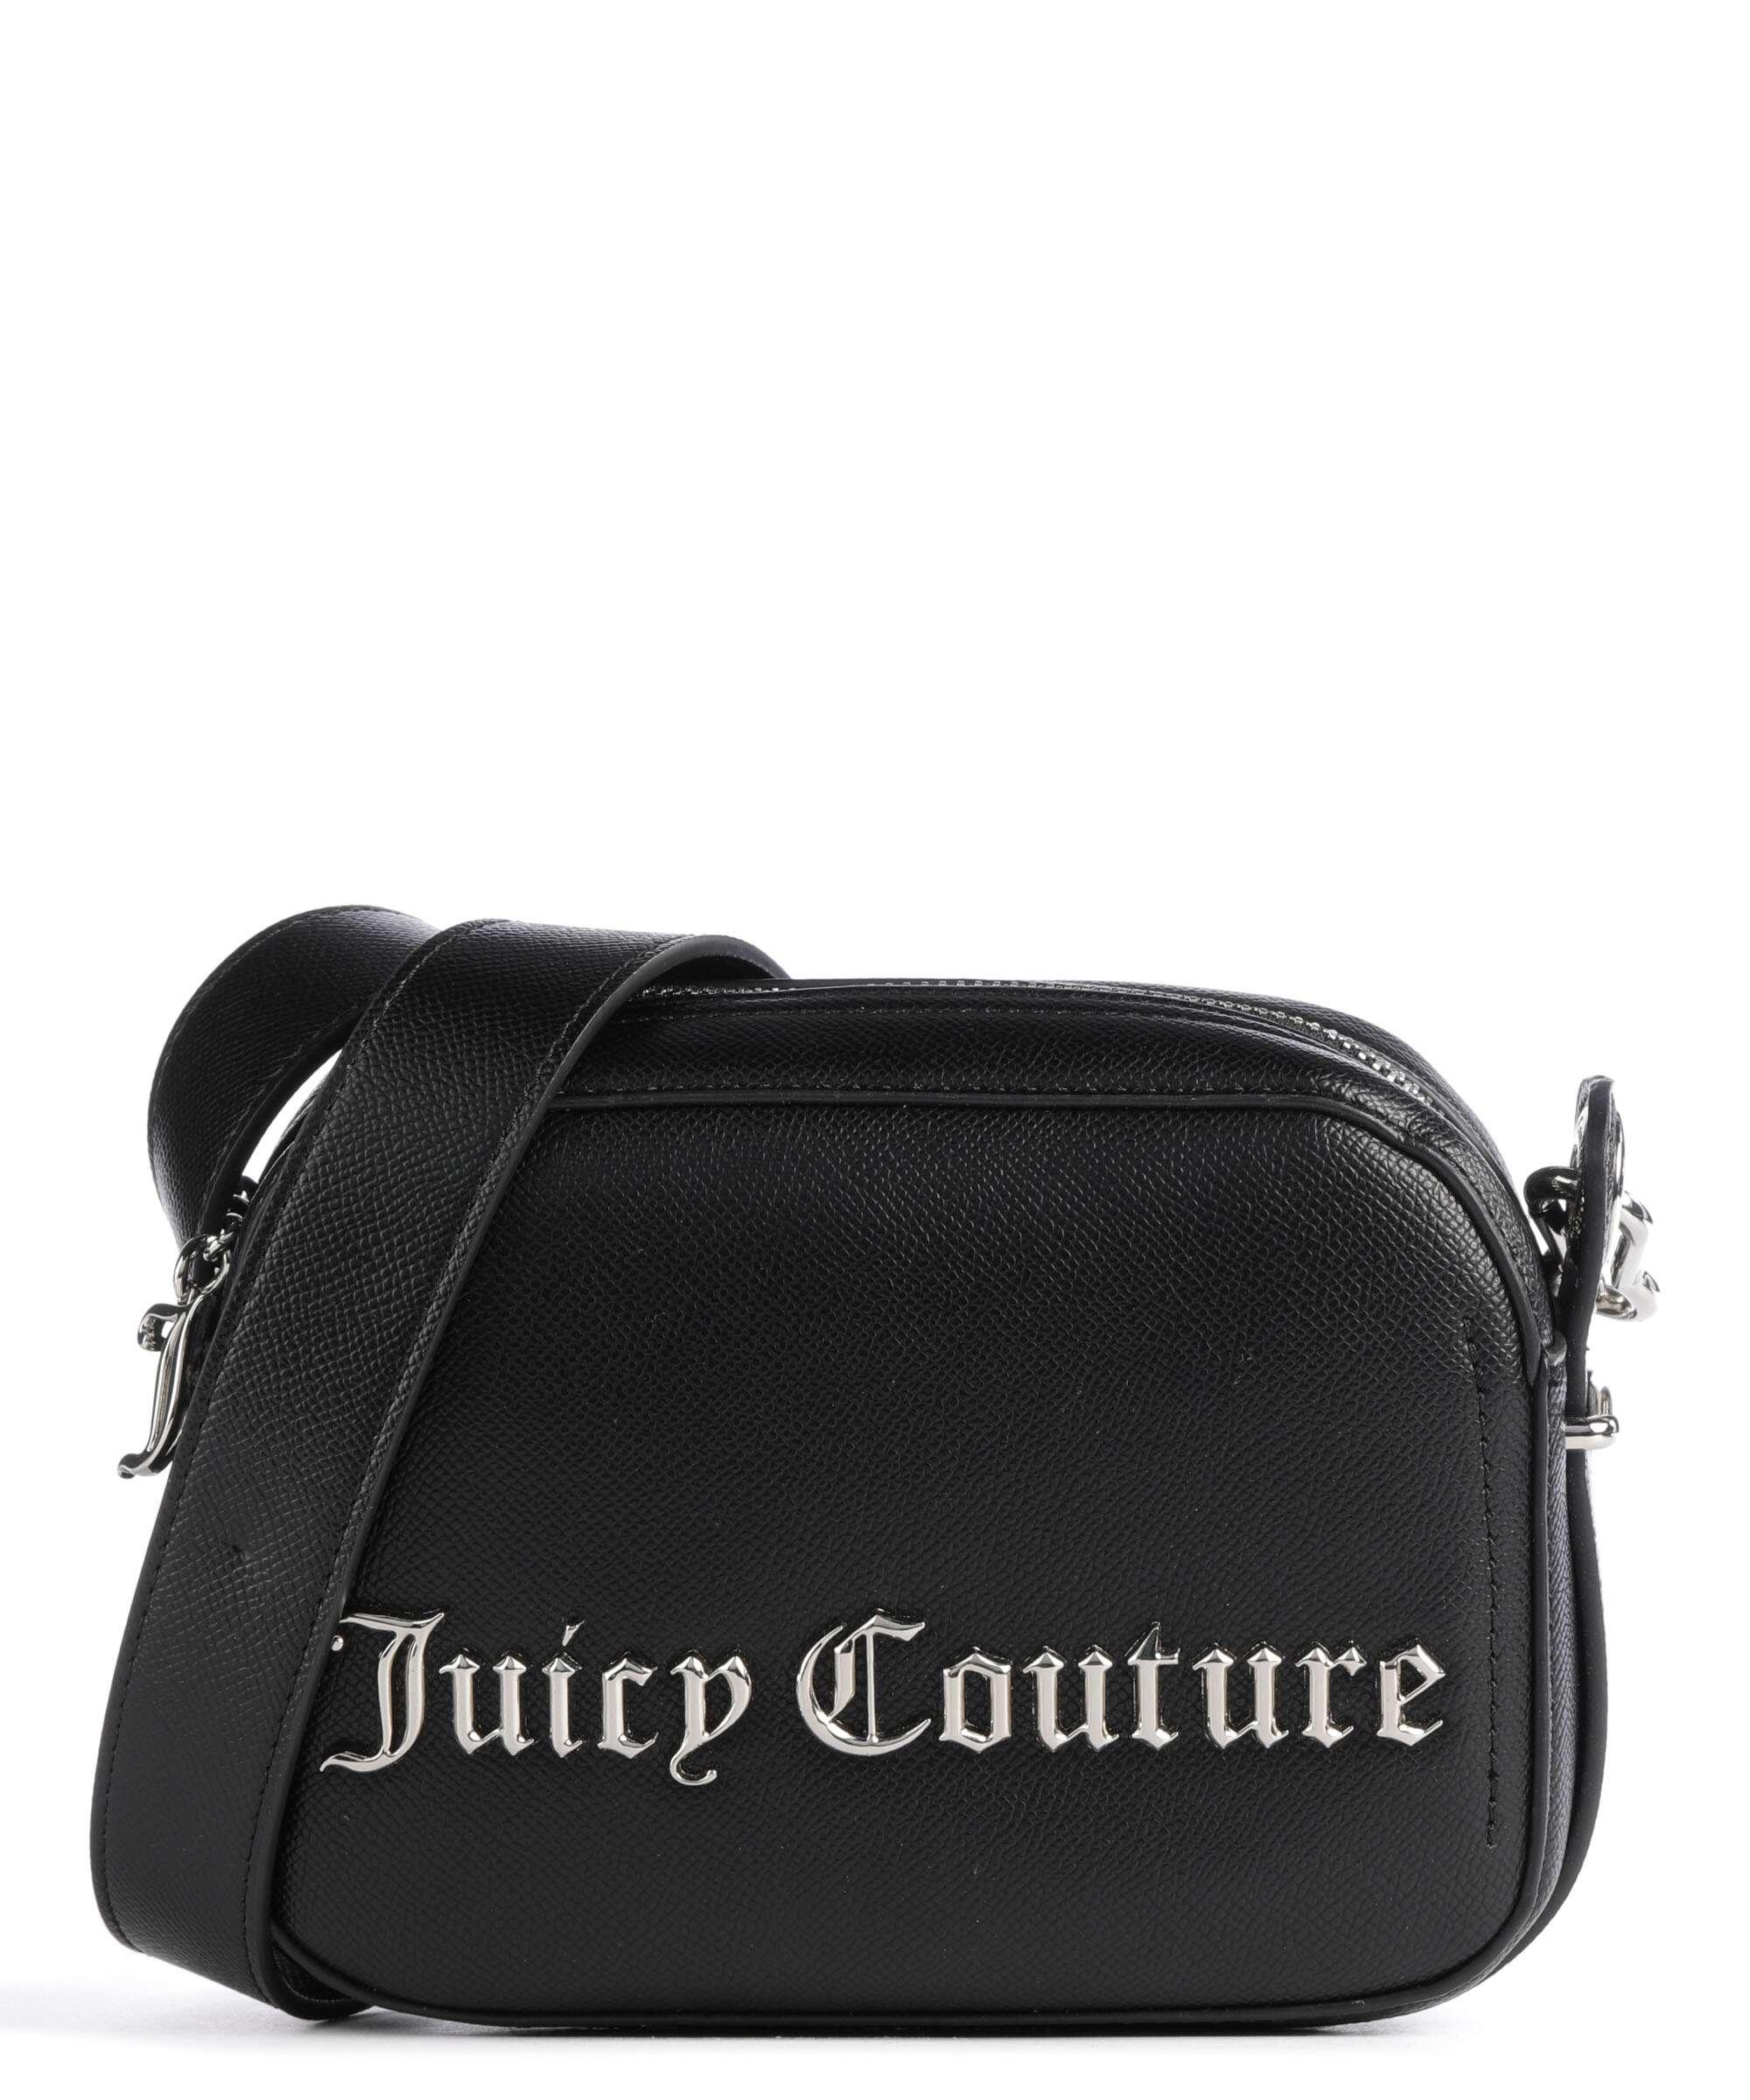 JUICY COUTURE Black Glam Flam Crossbody Small Handbag With Gold Details  Purse - Etsy